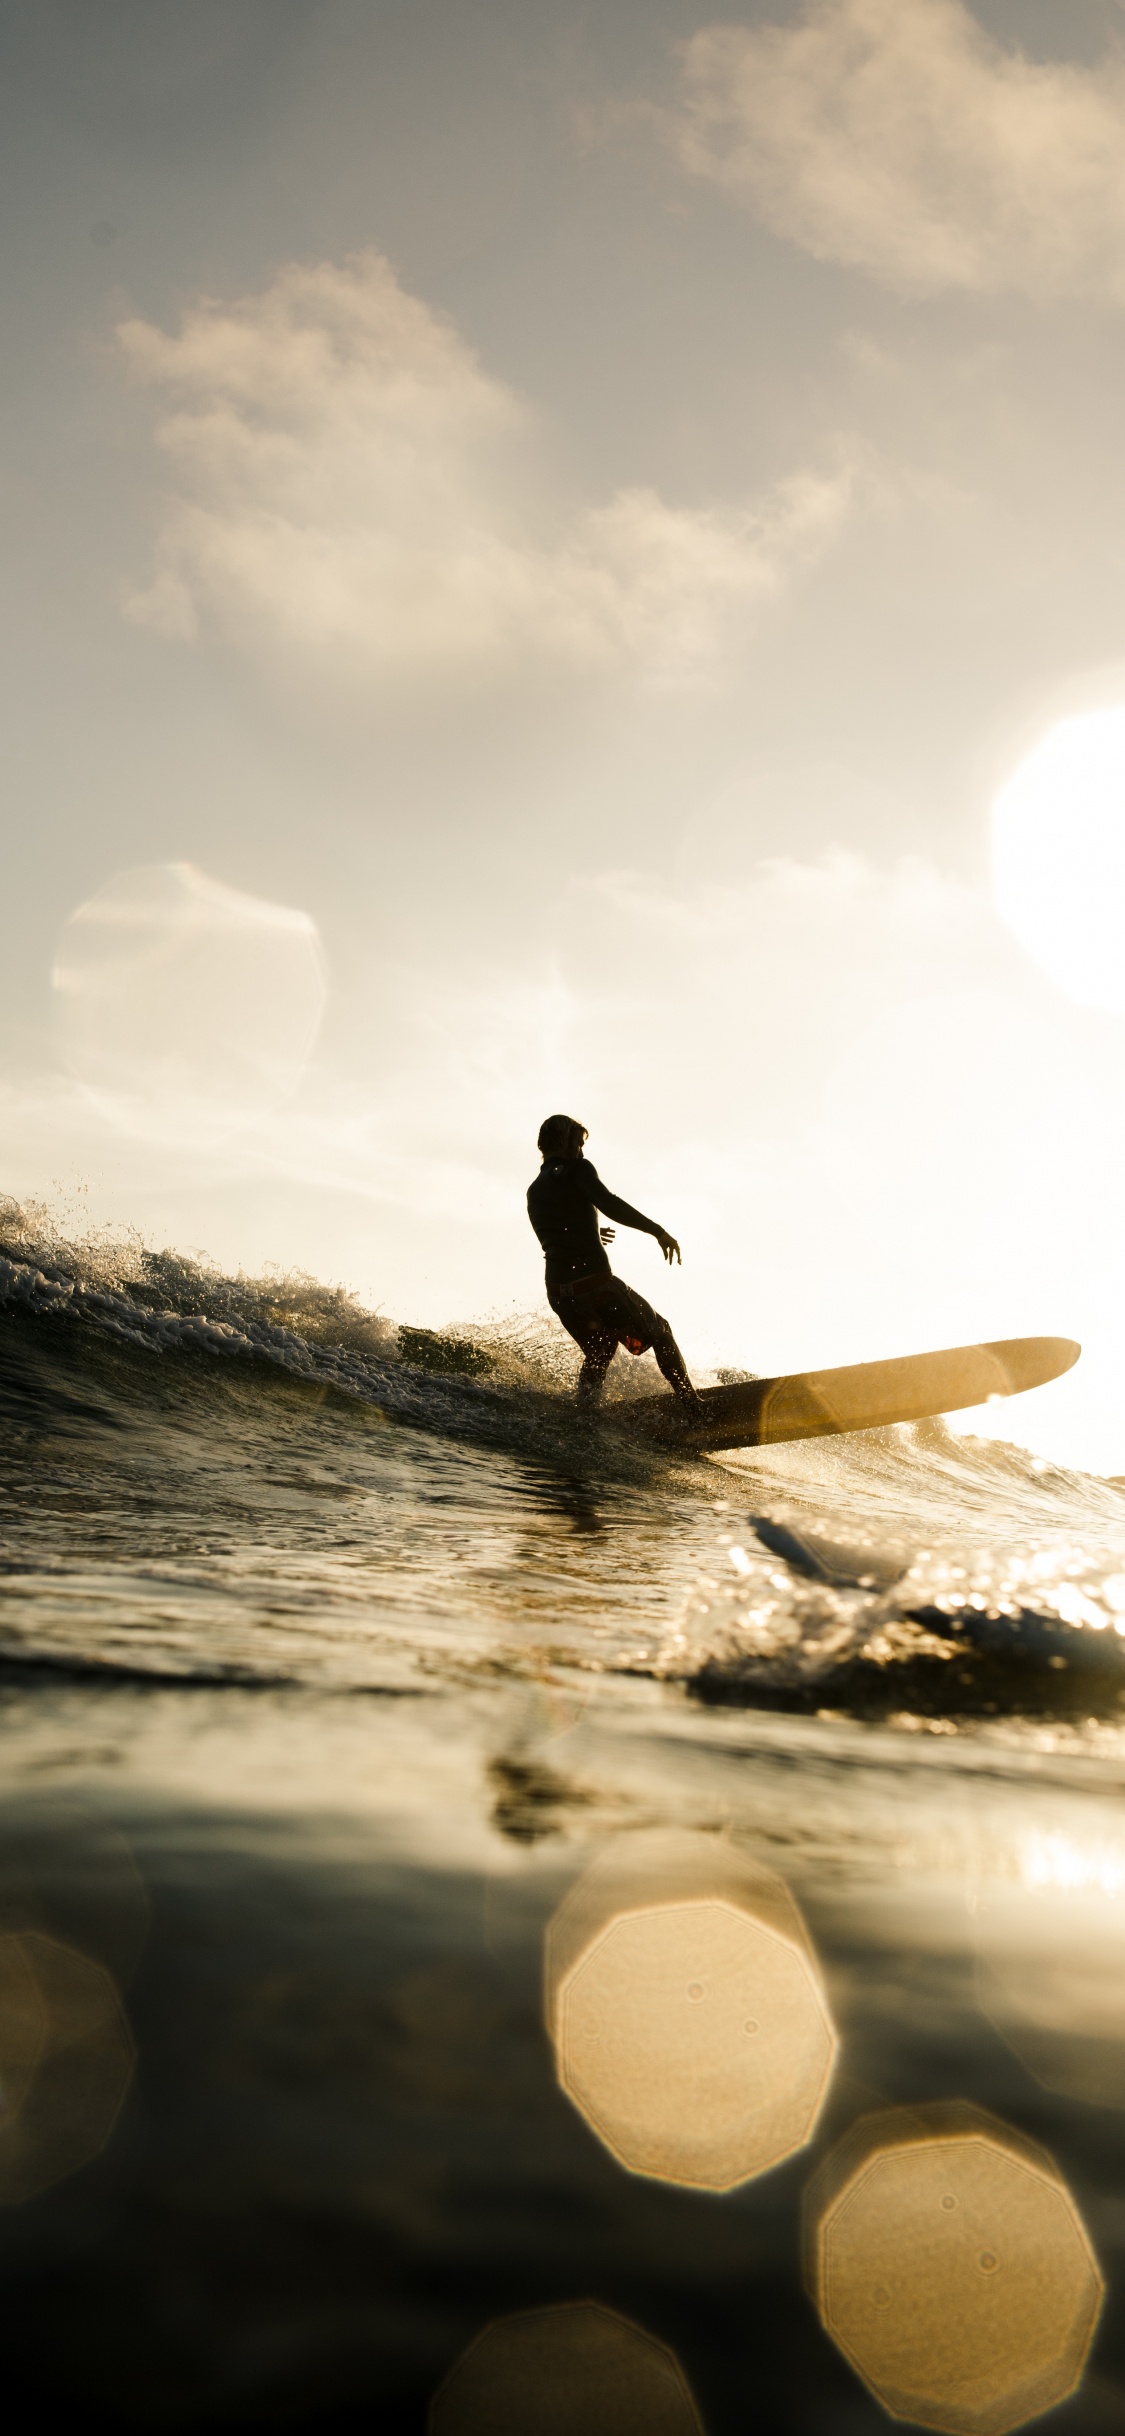 Silhouette of Man Holding Surfboard on Water During Daytime. Wallpaper in 1125x2436 Resolution